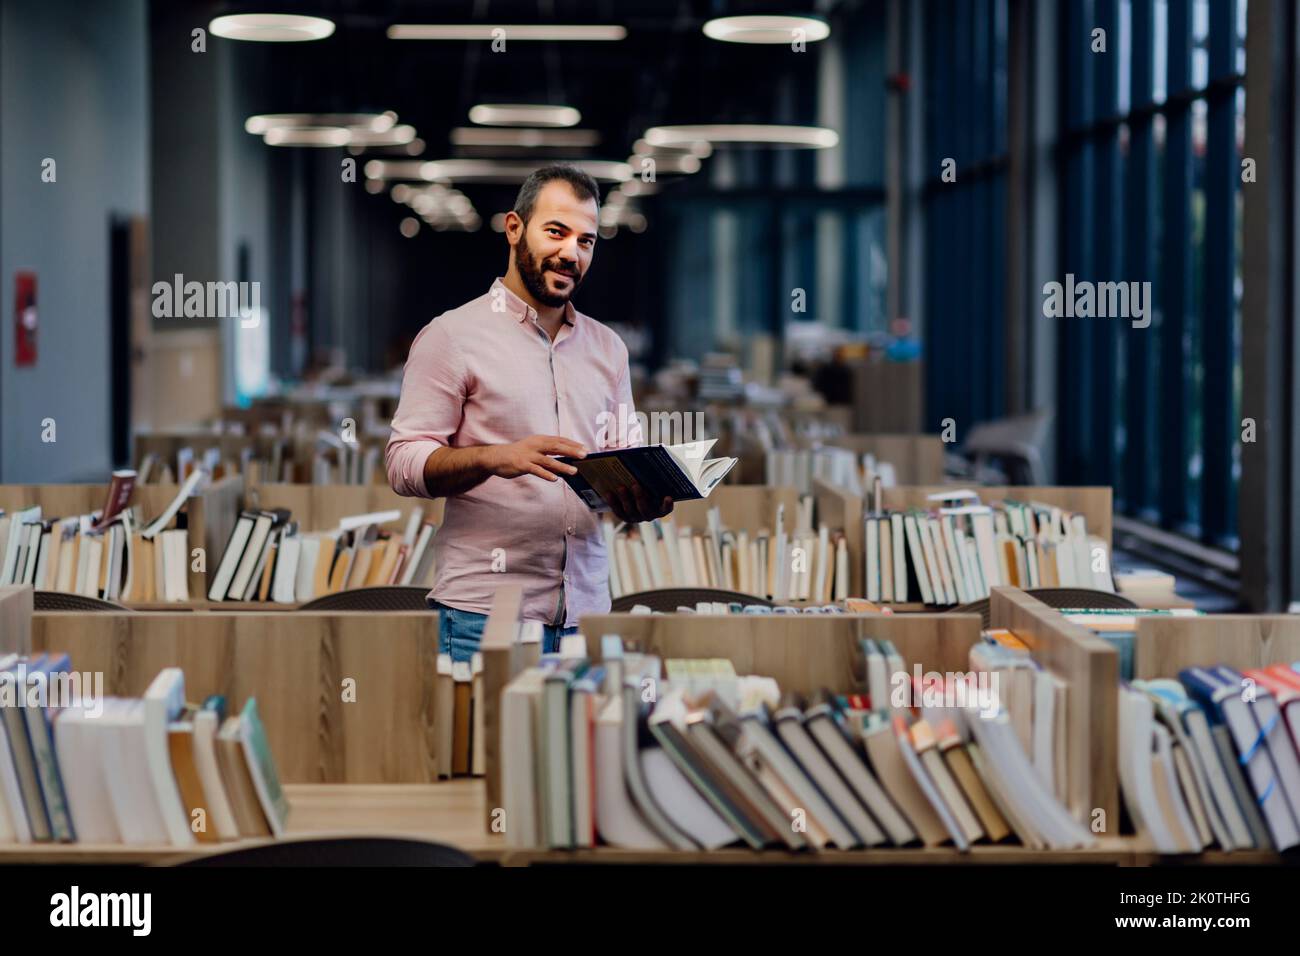 College student reading books in a library Stock Photo